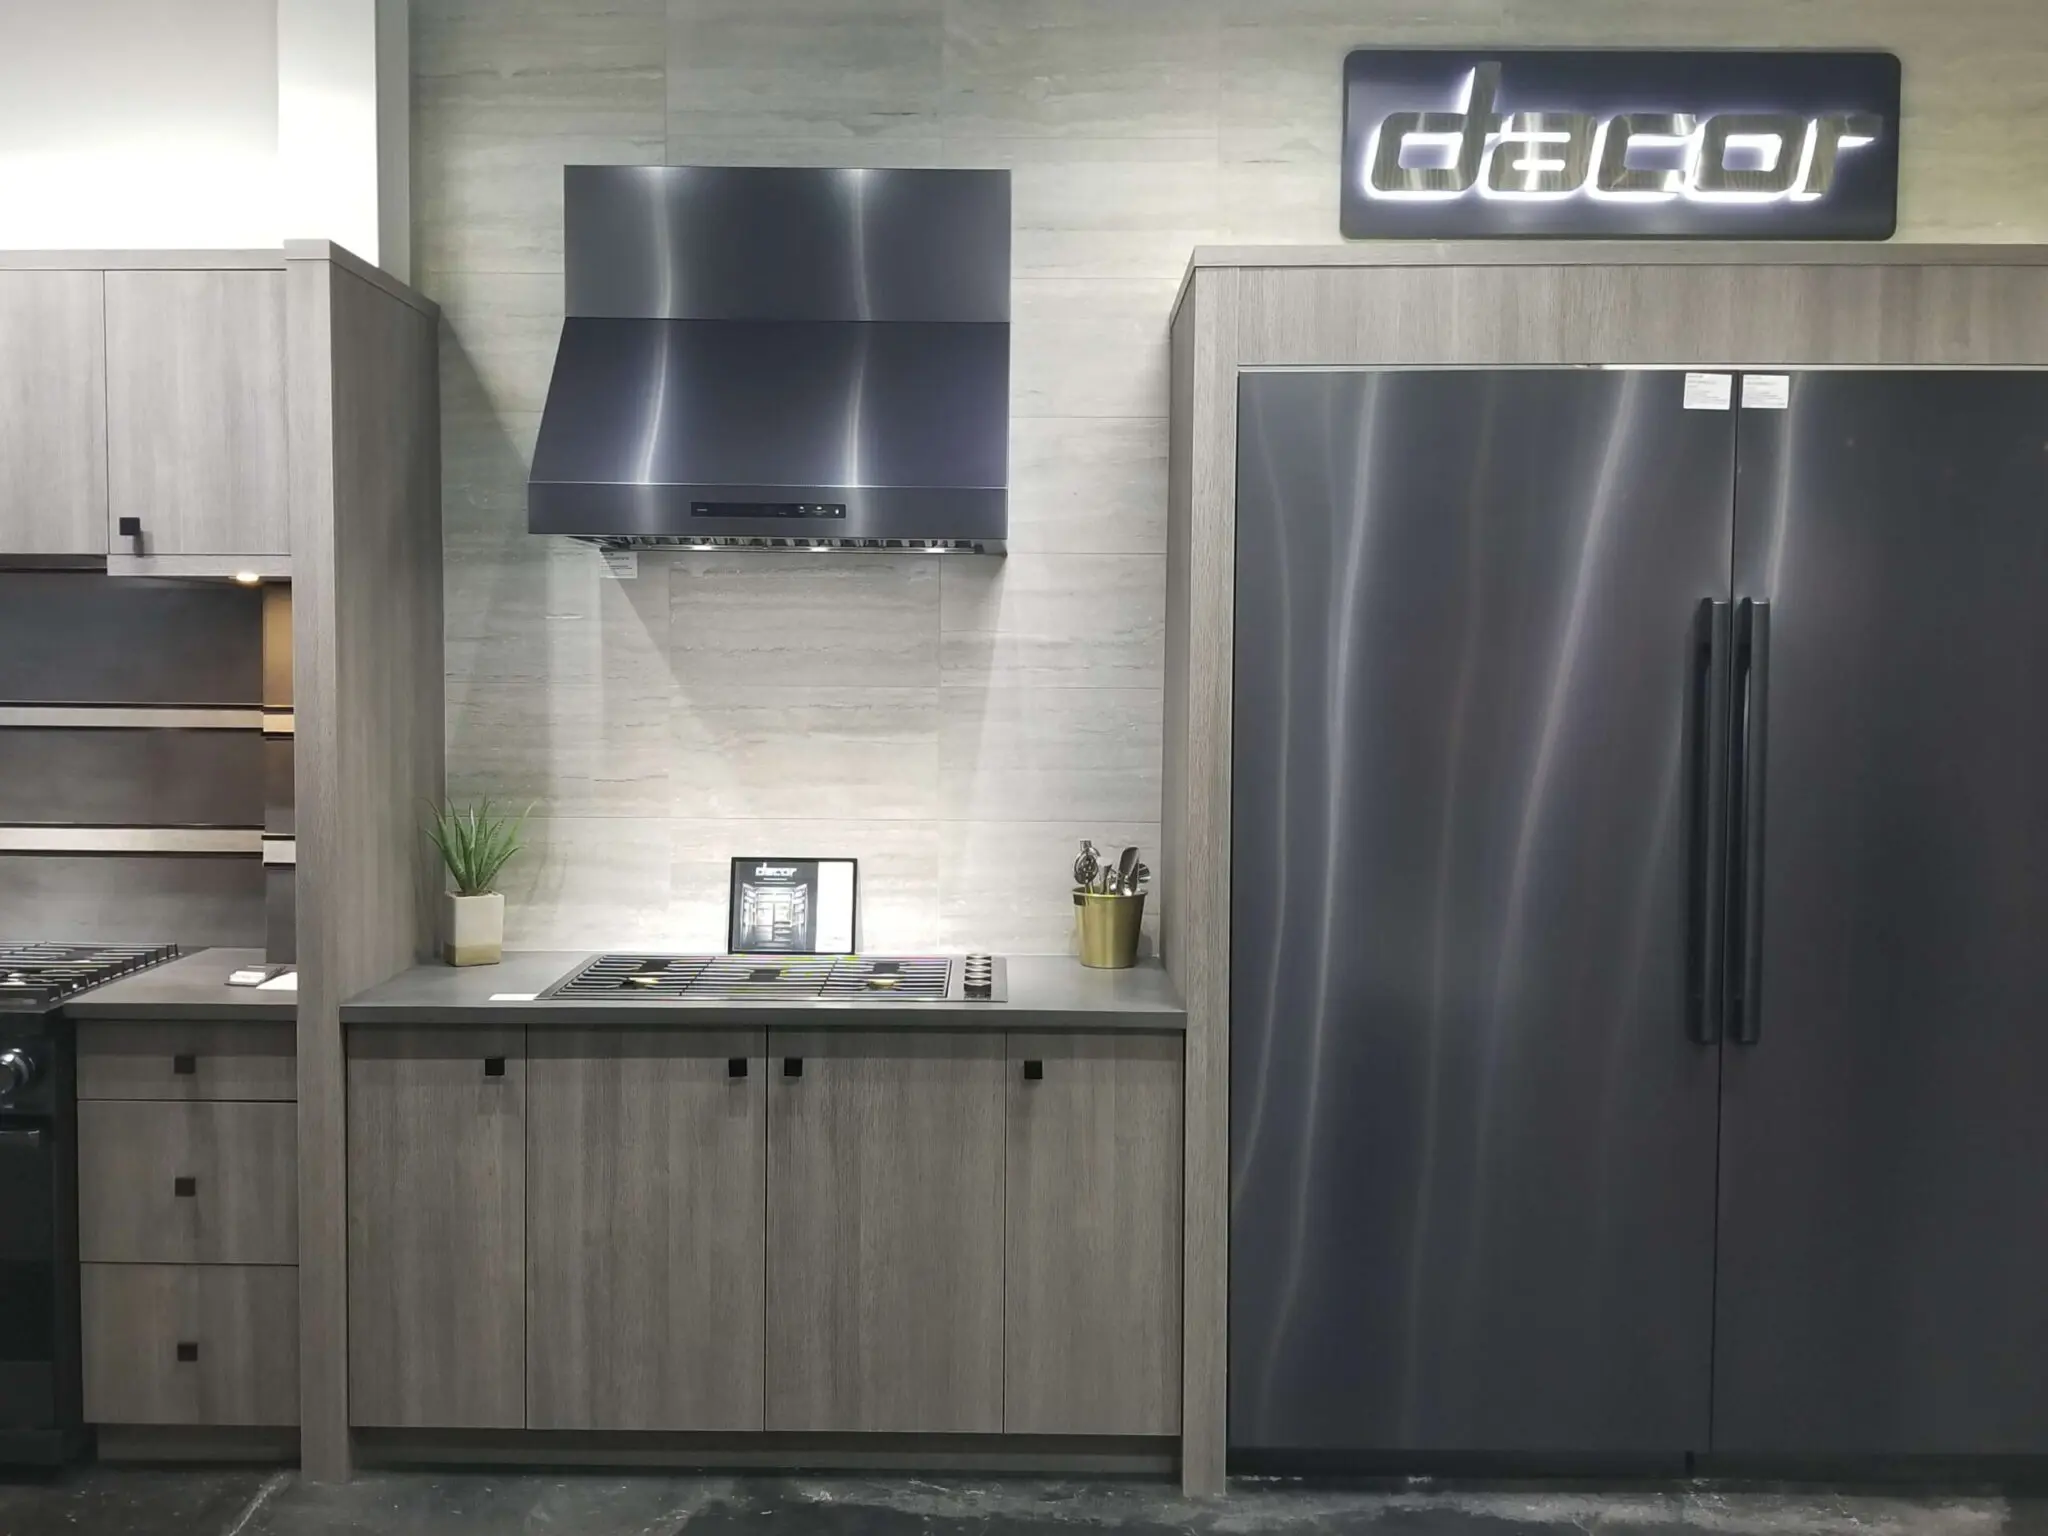 Dacor Refrigerator, Cooktop, and Vent Hood